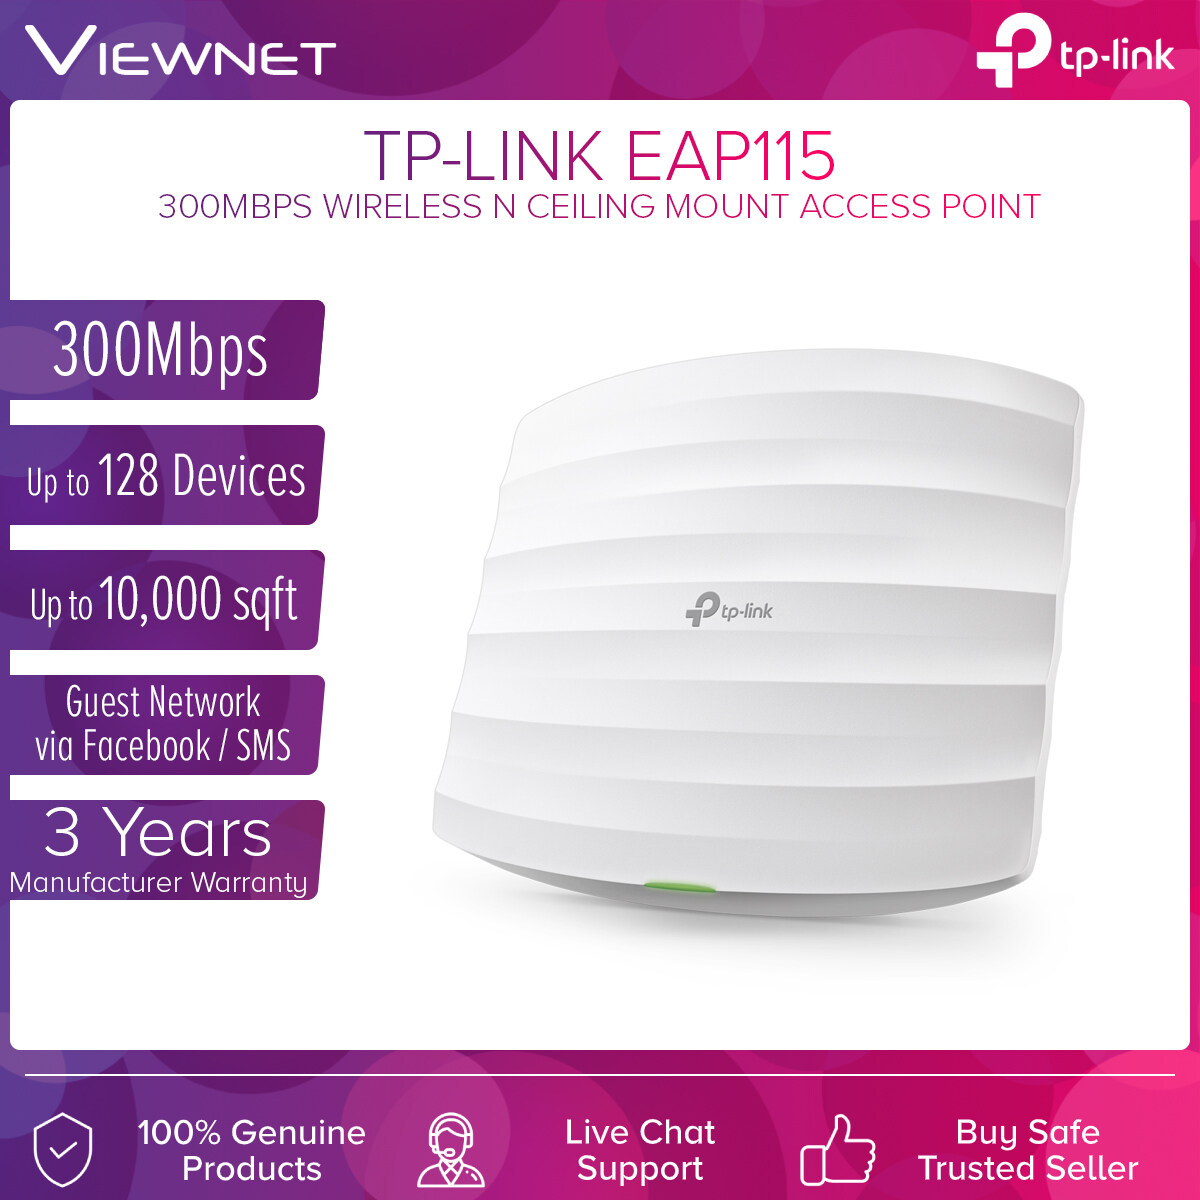 TP-Link EAP115 300Mbps Wireless Wifi Ceiling Mount Access Point EAP115